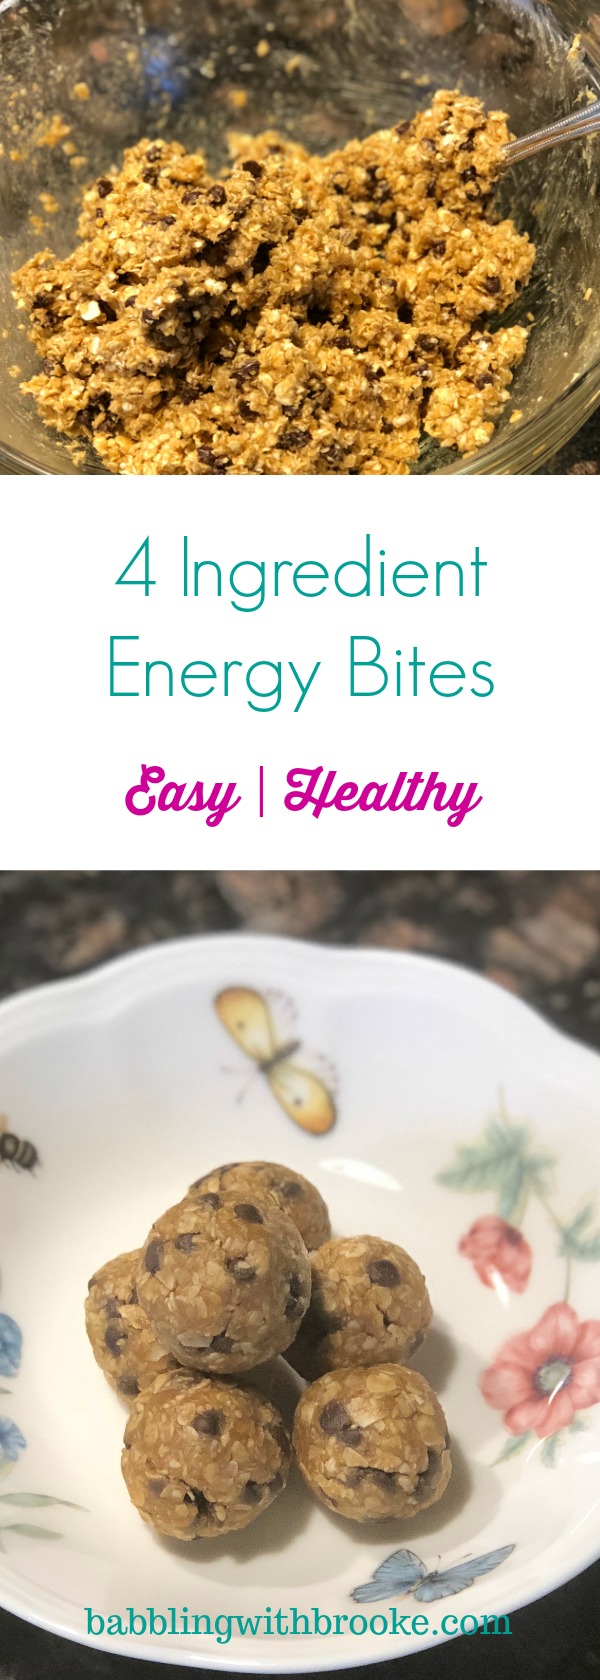 These energy bites are so easy to make plus they are delicious! They are healthy and perfect for a mid-day snack or a pre-work snack! Very fulfilling and super easy! #easysnackrecipe #energybites #snack #preworkoutrecipe 